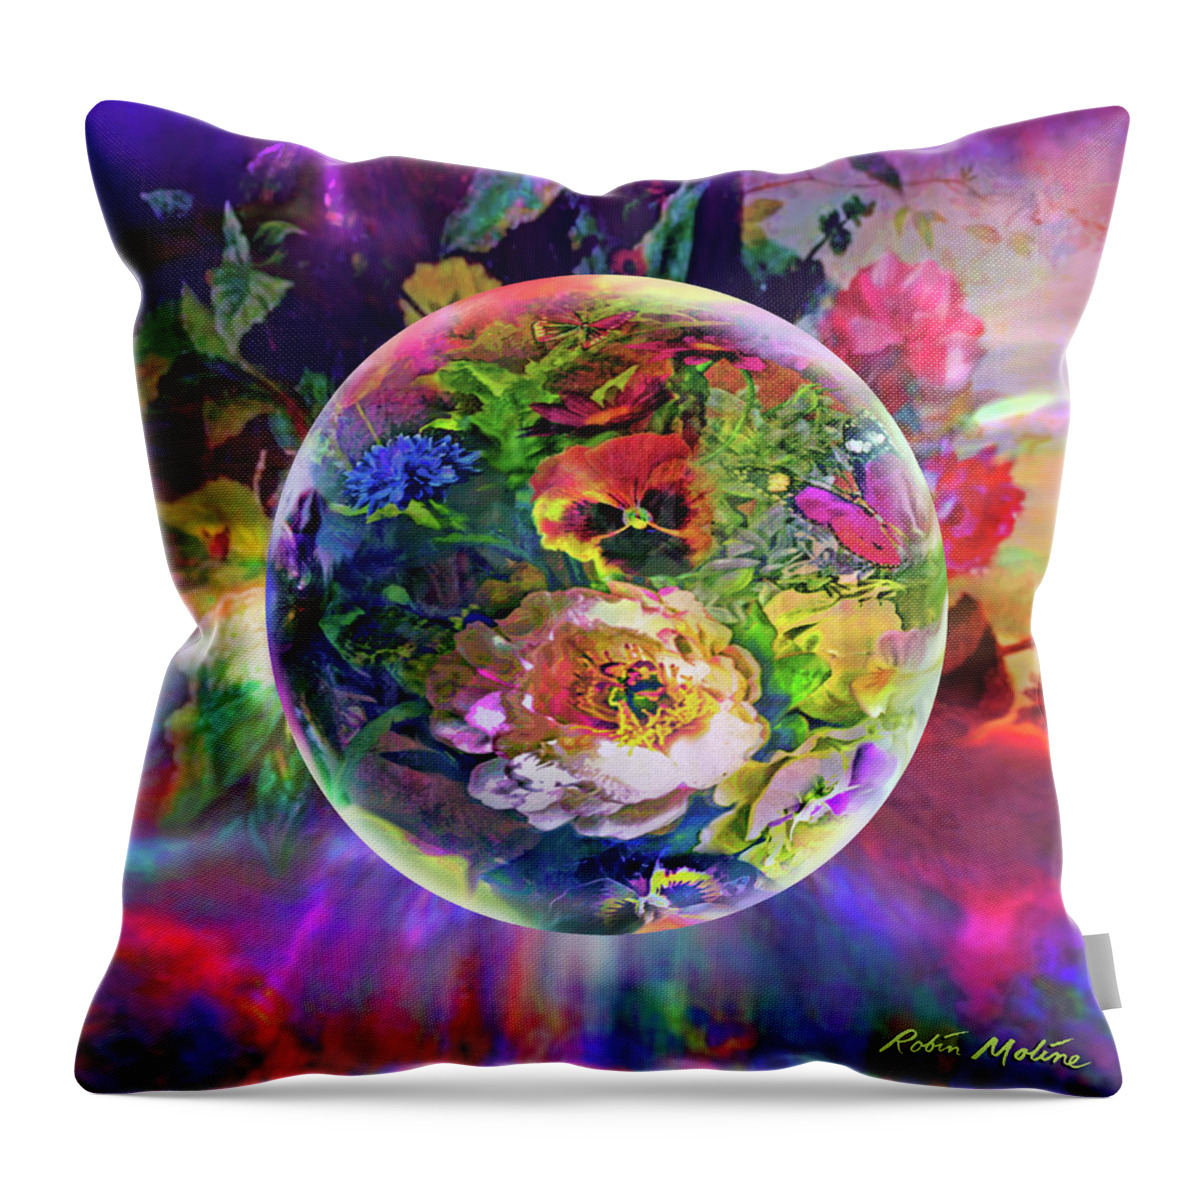 Flowers Throw Pillow featuring the painting Summertime Passing by Robin Moline